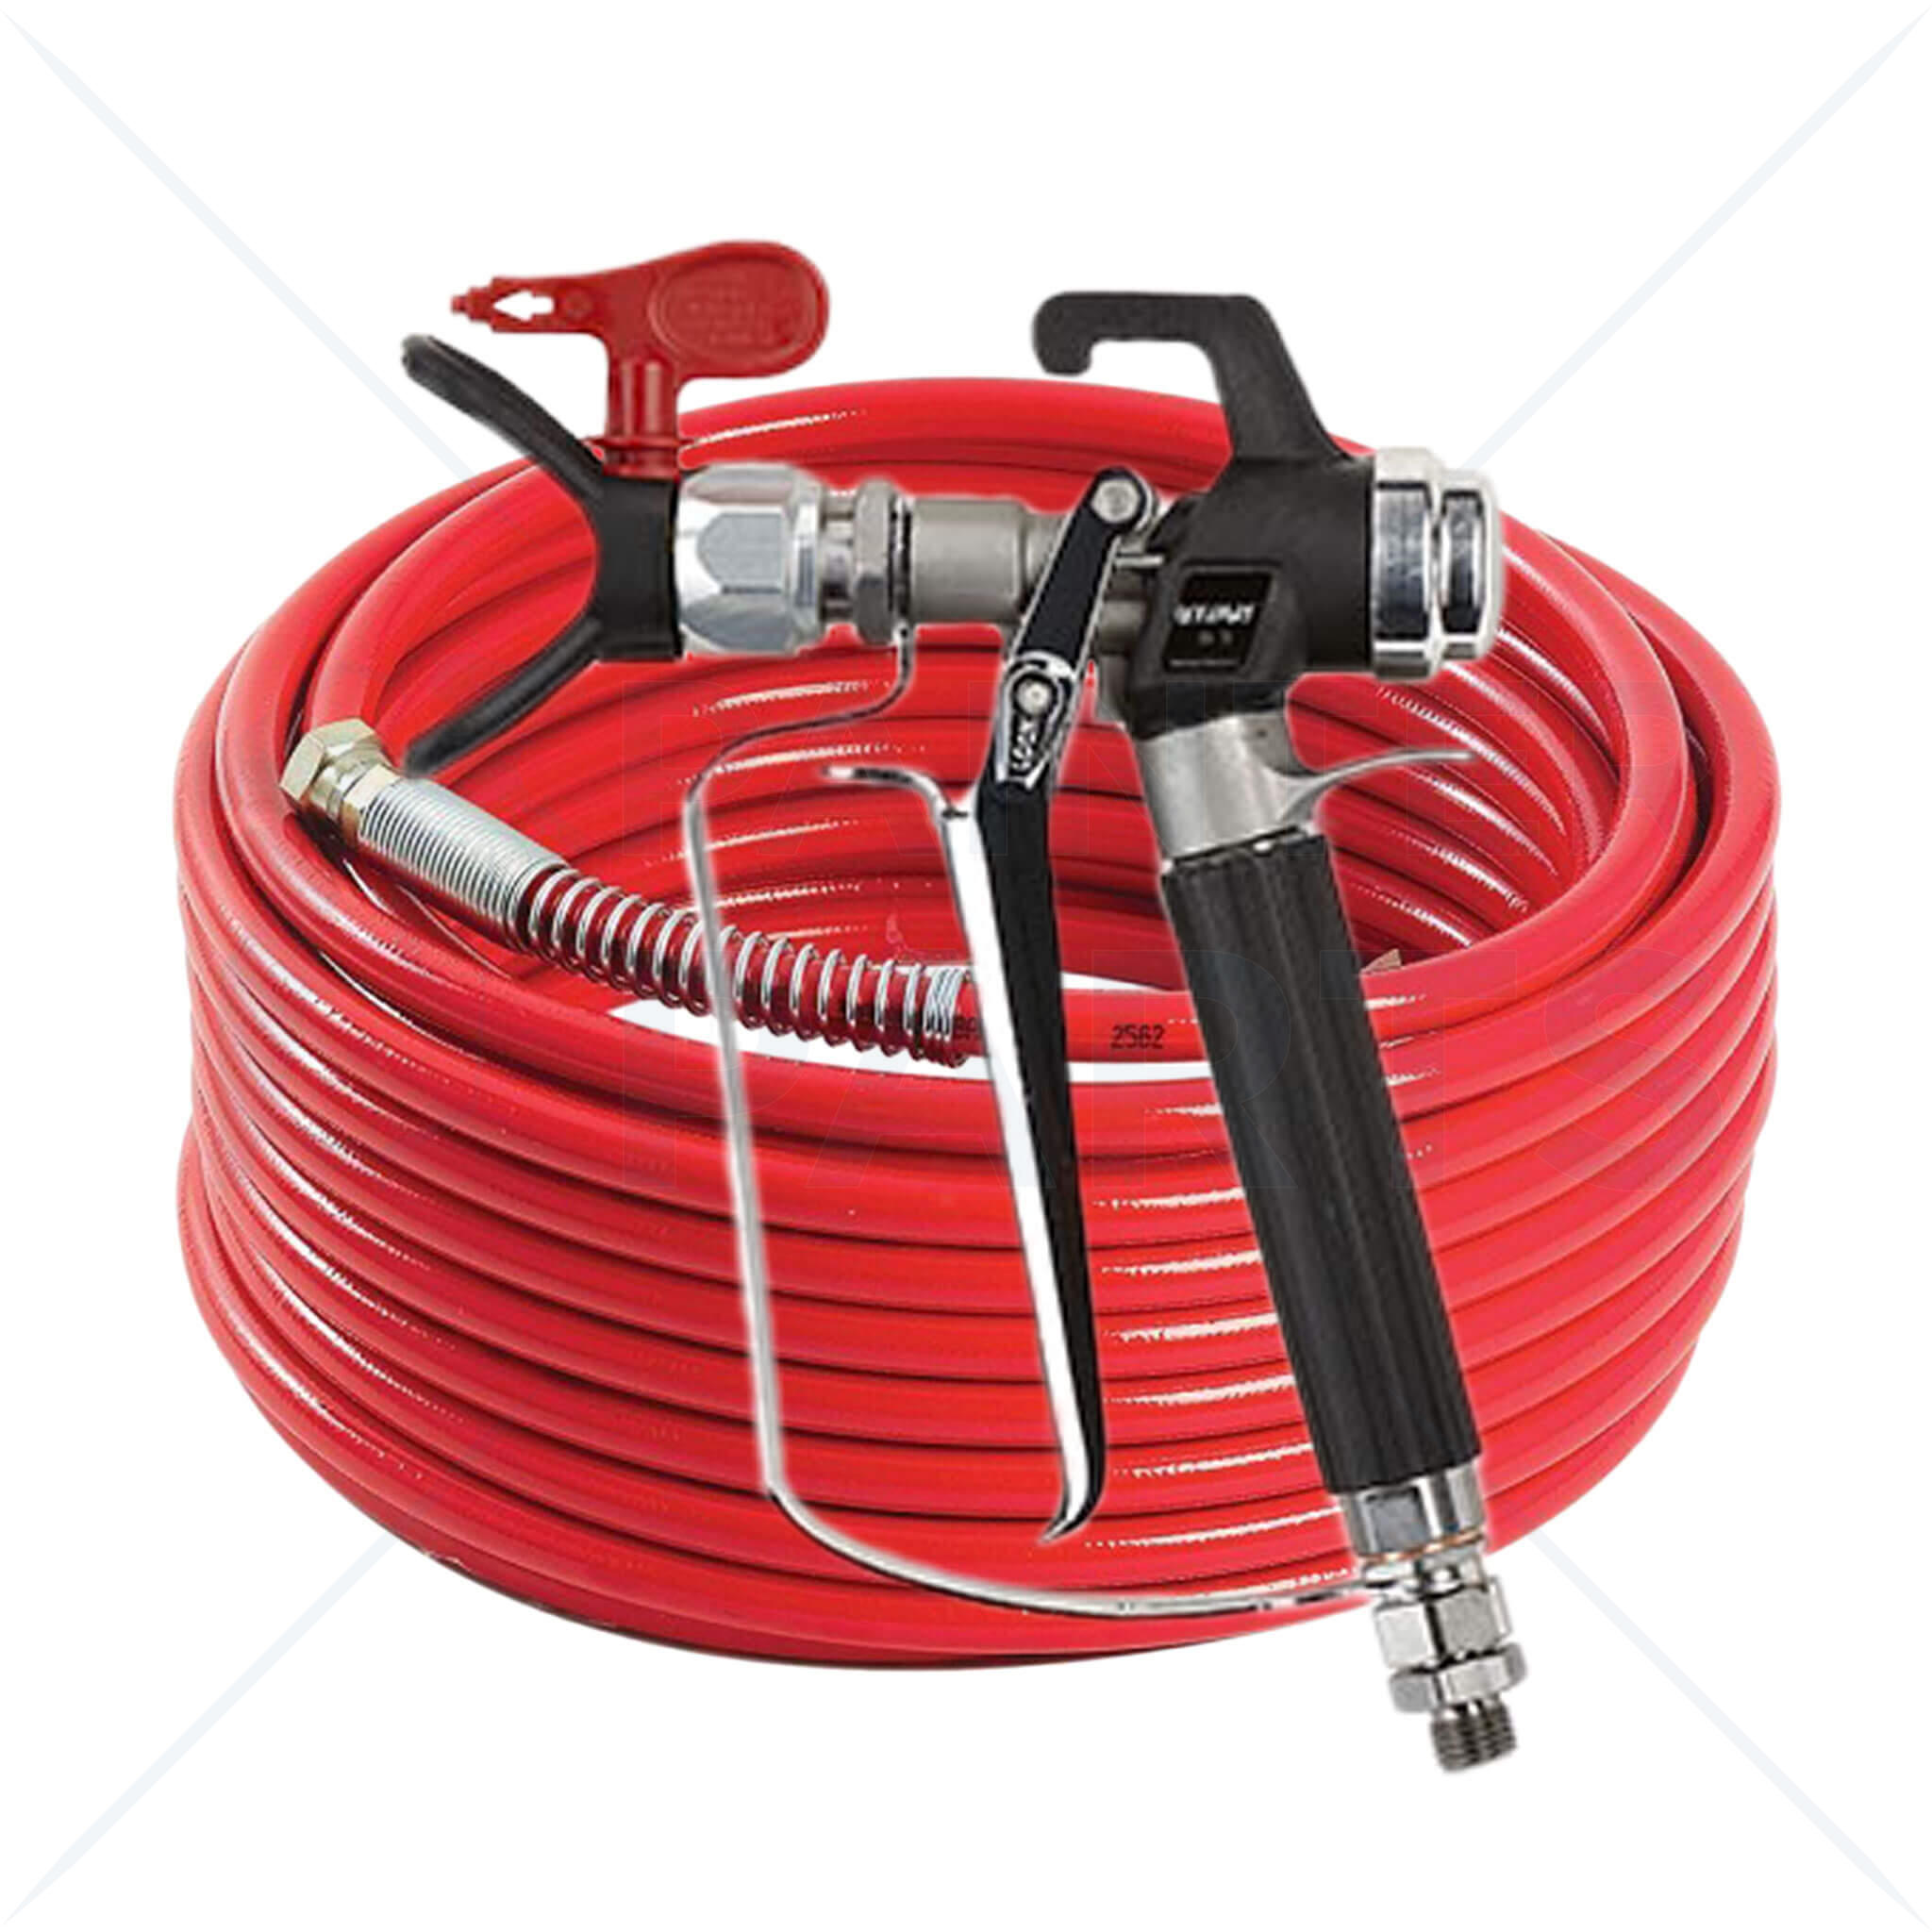 https://www.painterparts.com/files/styles/uc_product_full/public/dynamic/field/image/product/80/titan-s-3-with-hose-and-tip.jpg?itok=JtW_DnyD